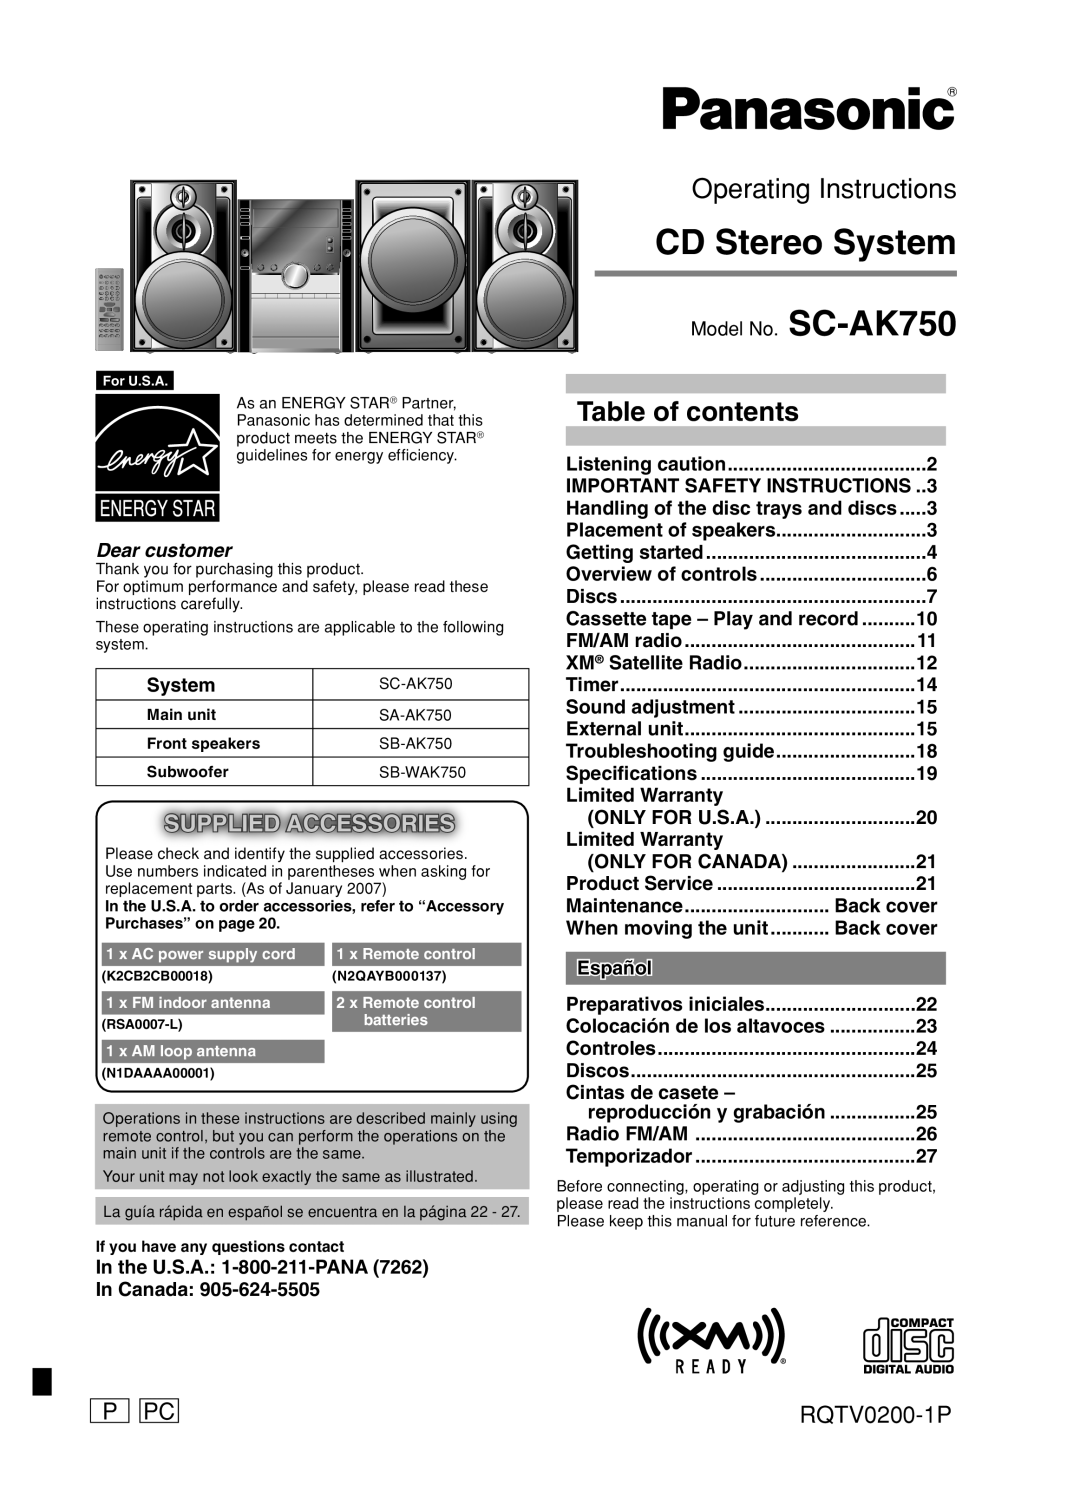 Panasonic Stereo System, 377 operating instructions P Pc, RQTV0200-1P, Model No. SC-AK750, Important Safety Instructions 